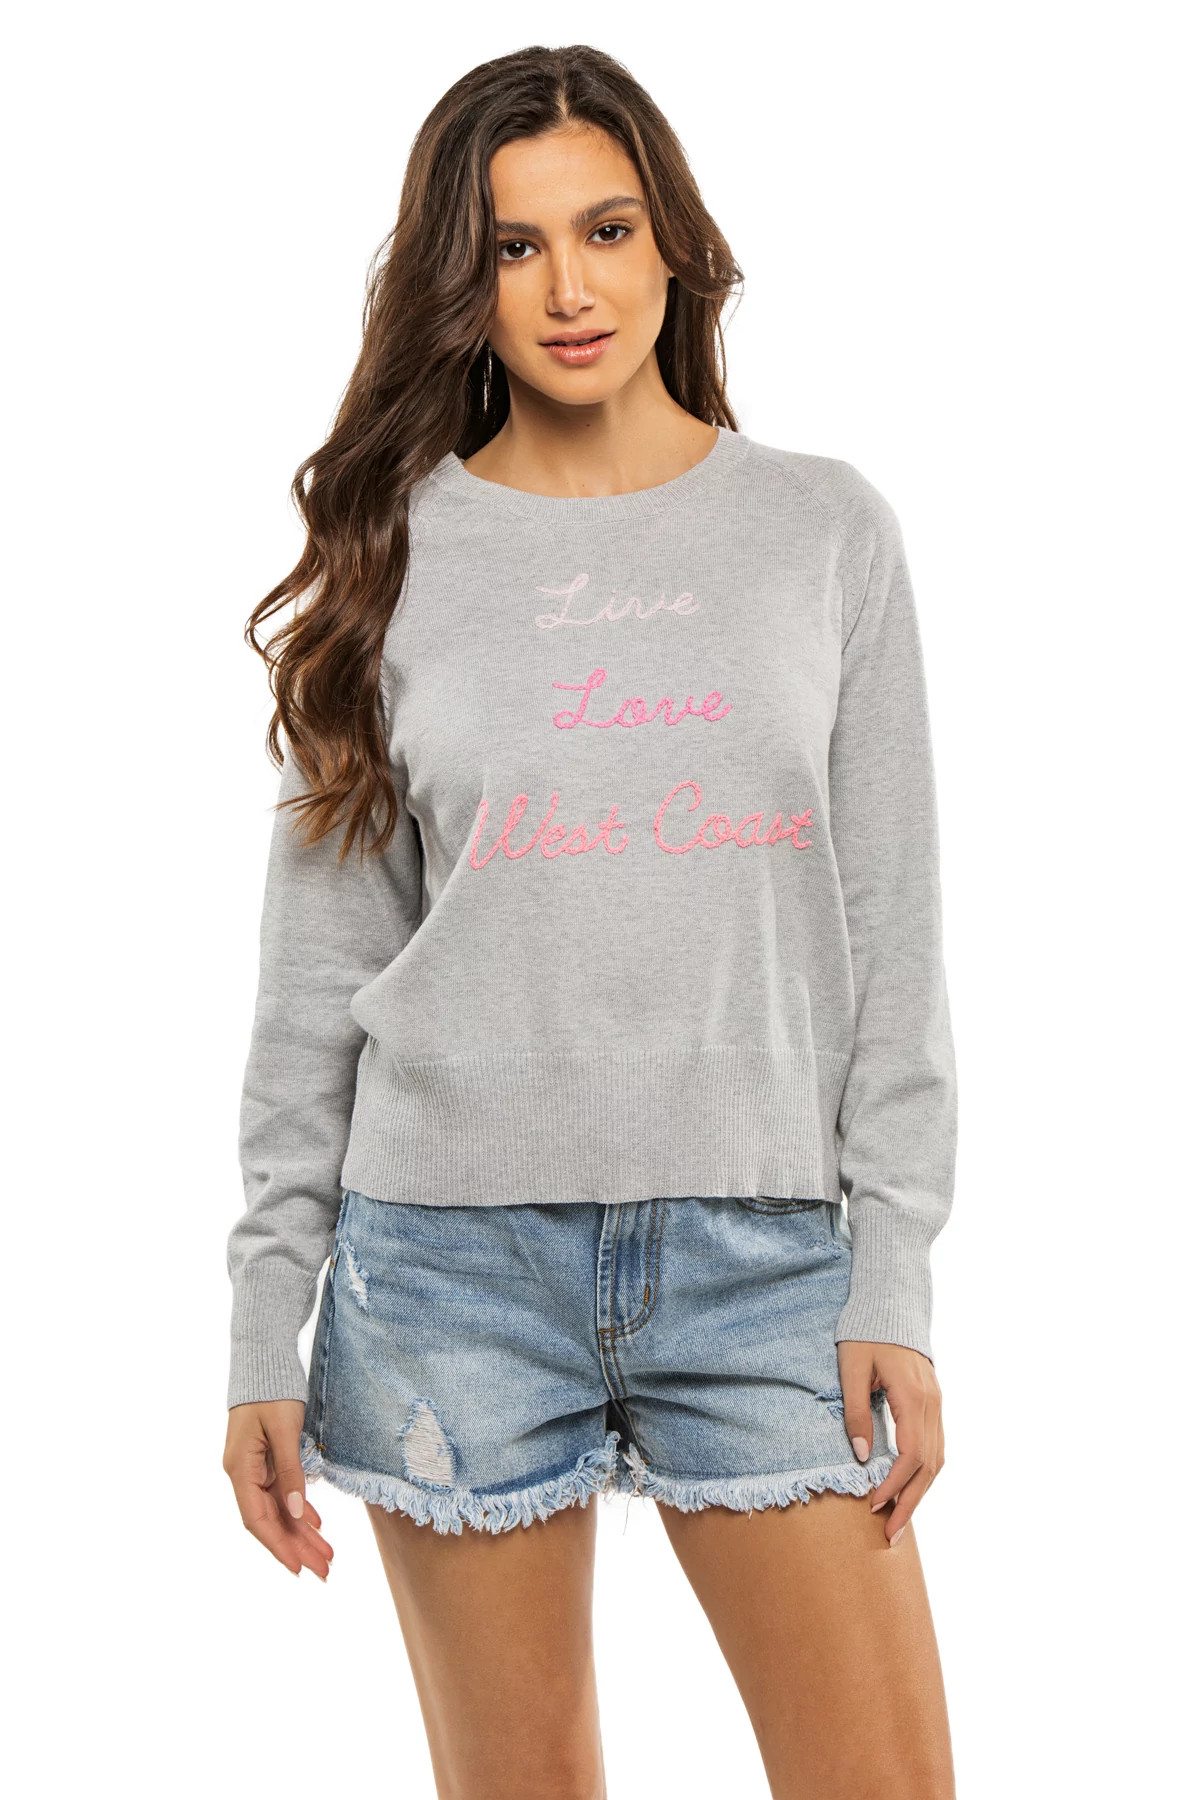 GREY/HOT PINK Live Love West Coast Sweater image number 1